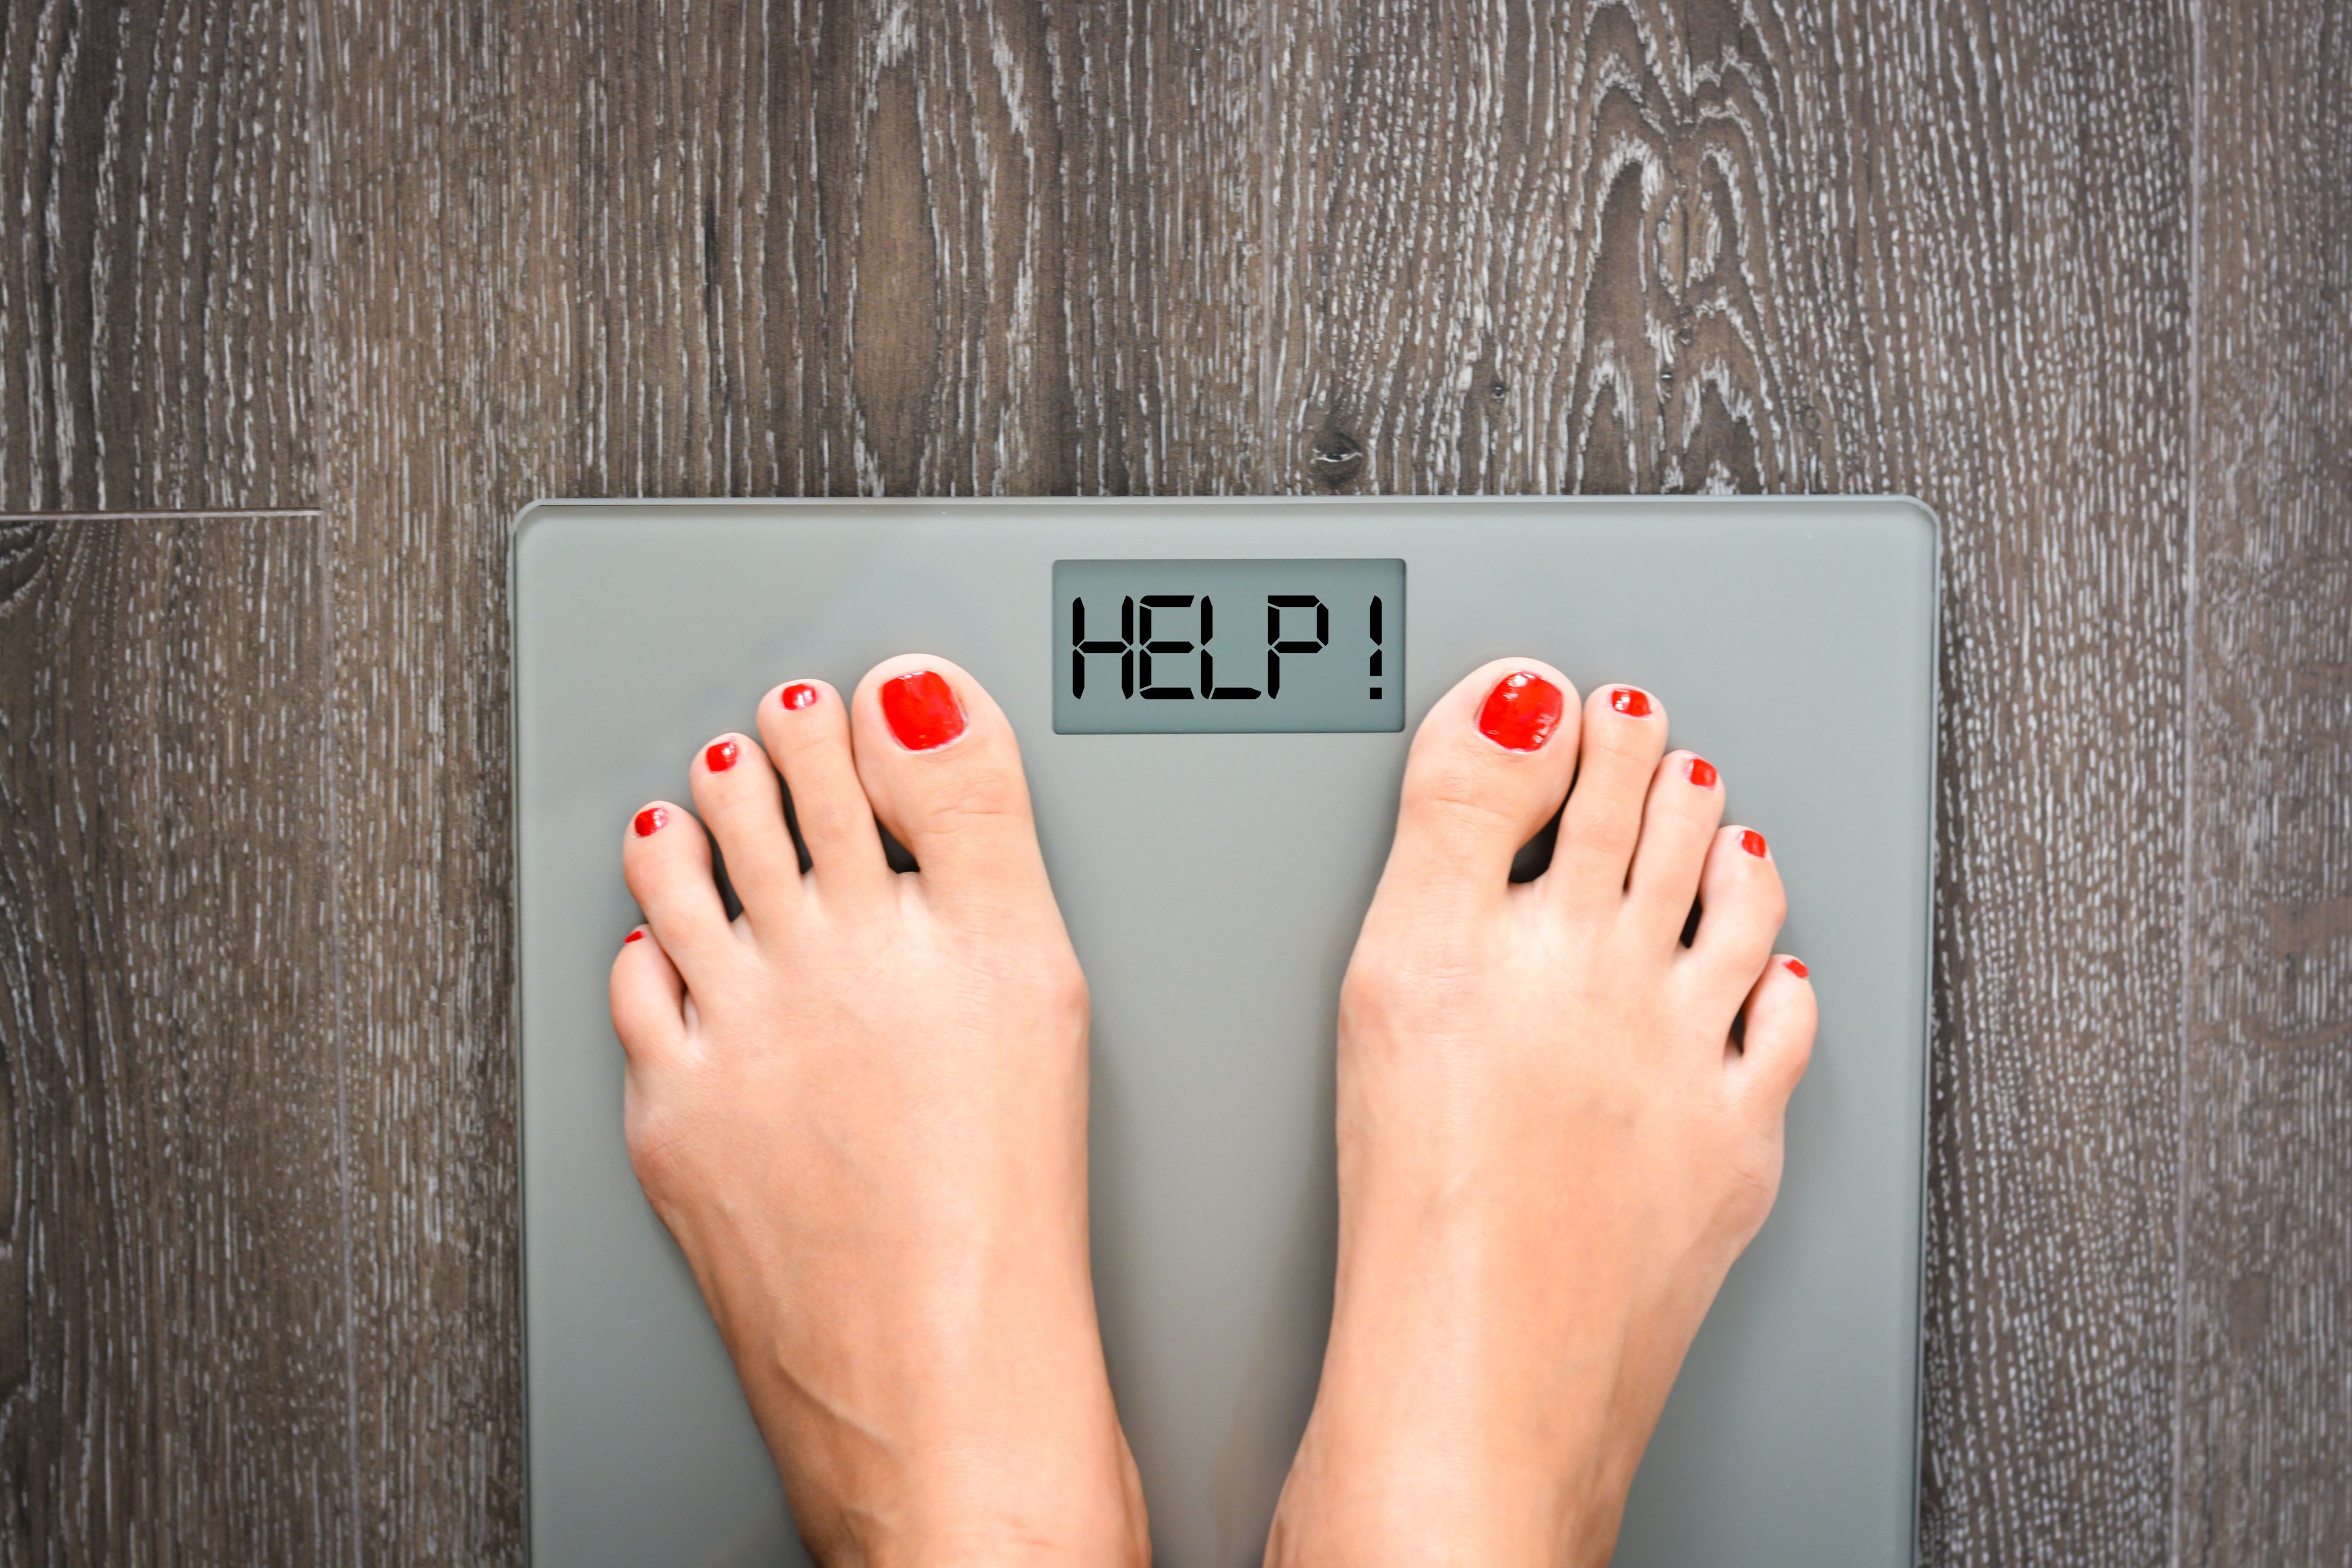 Does losing weight get rid of cellulite?